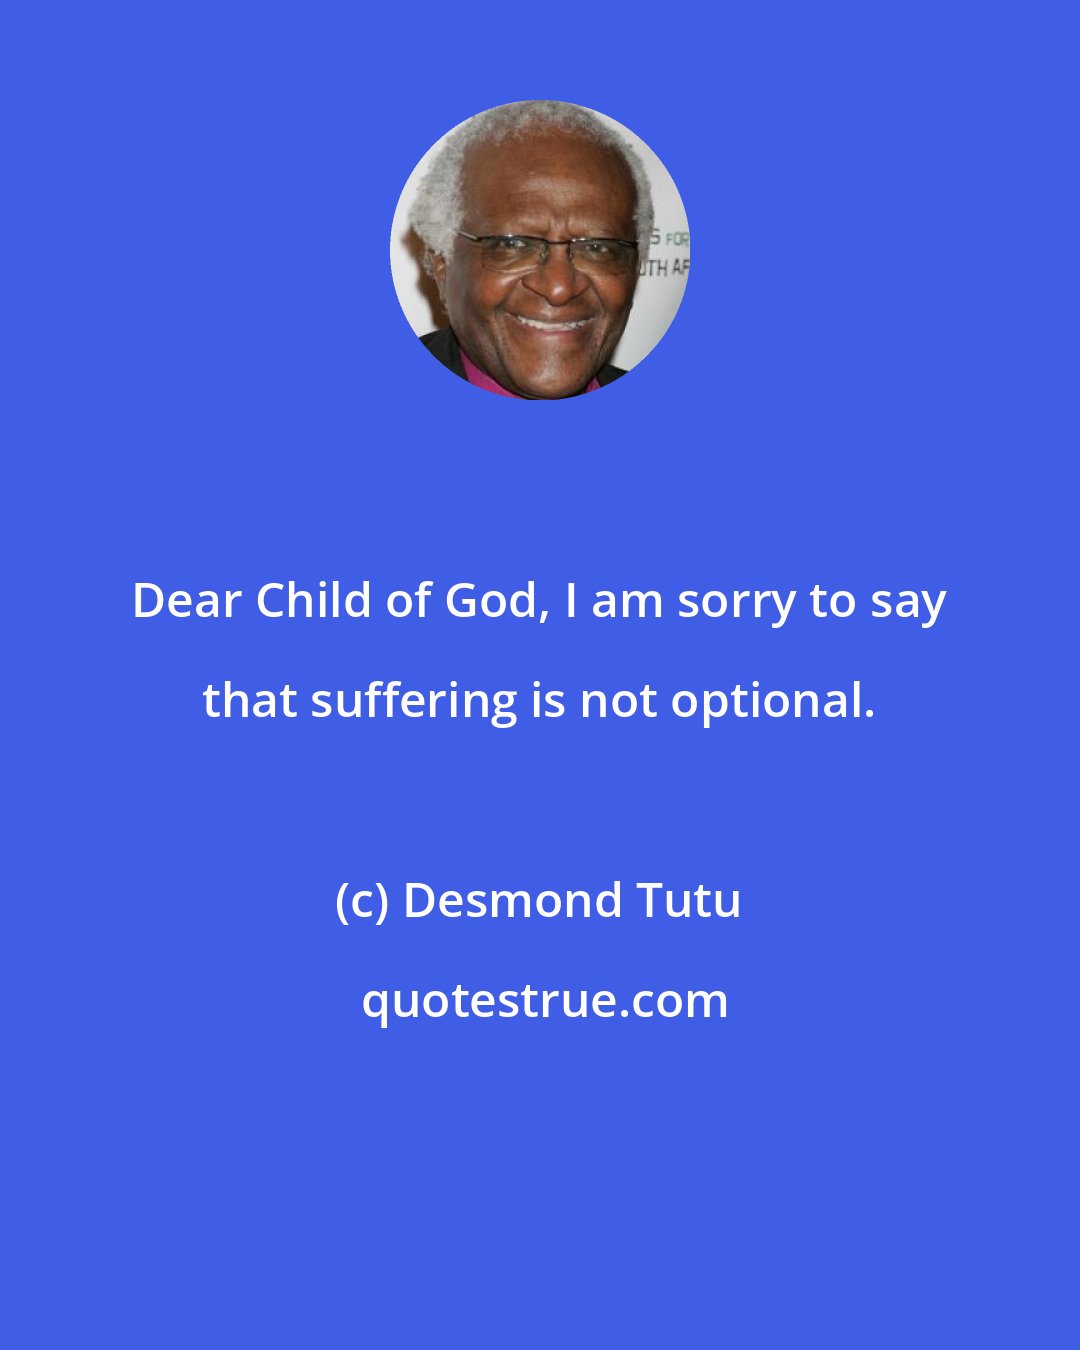 Desmond Tutu: Dear Child of God, I am sorry to say that suffering is not optional.